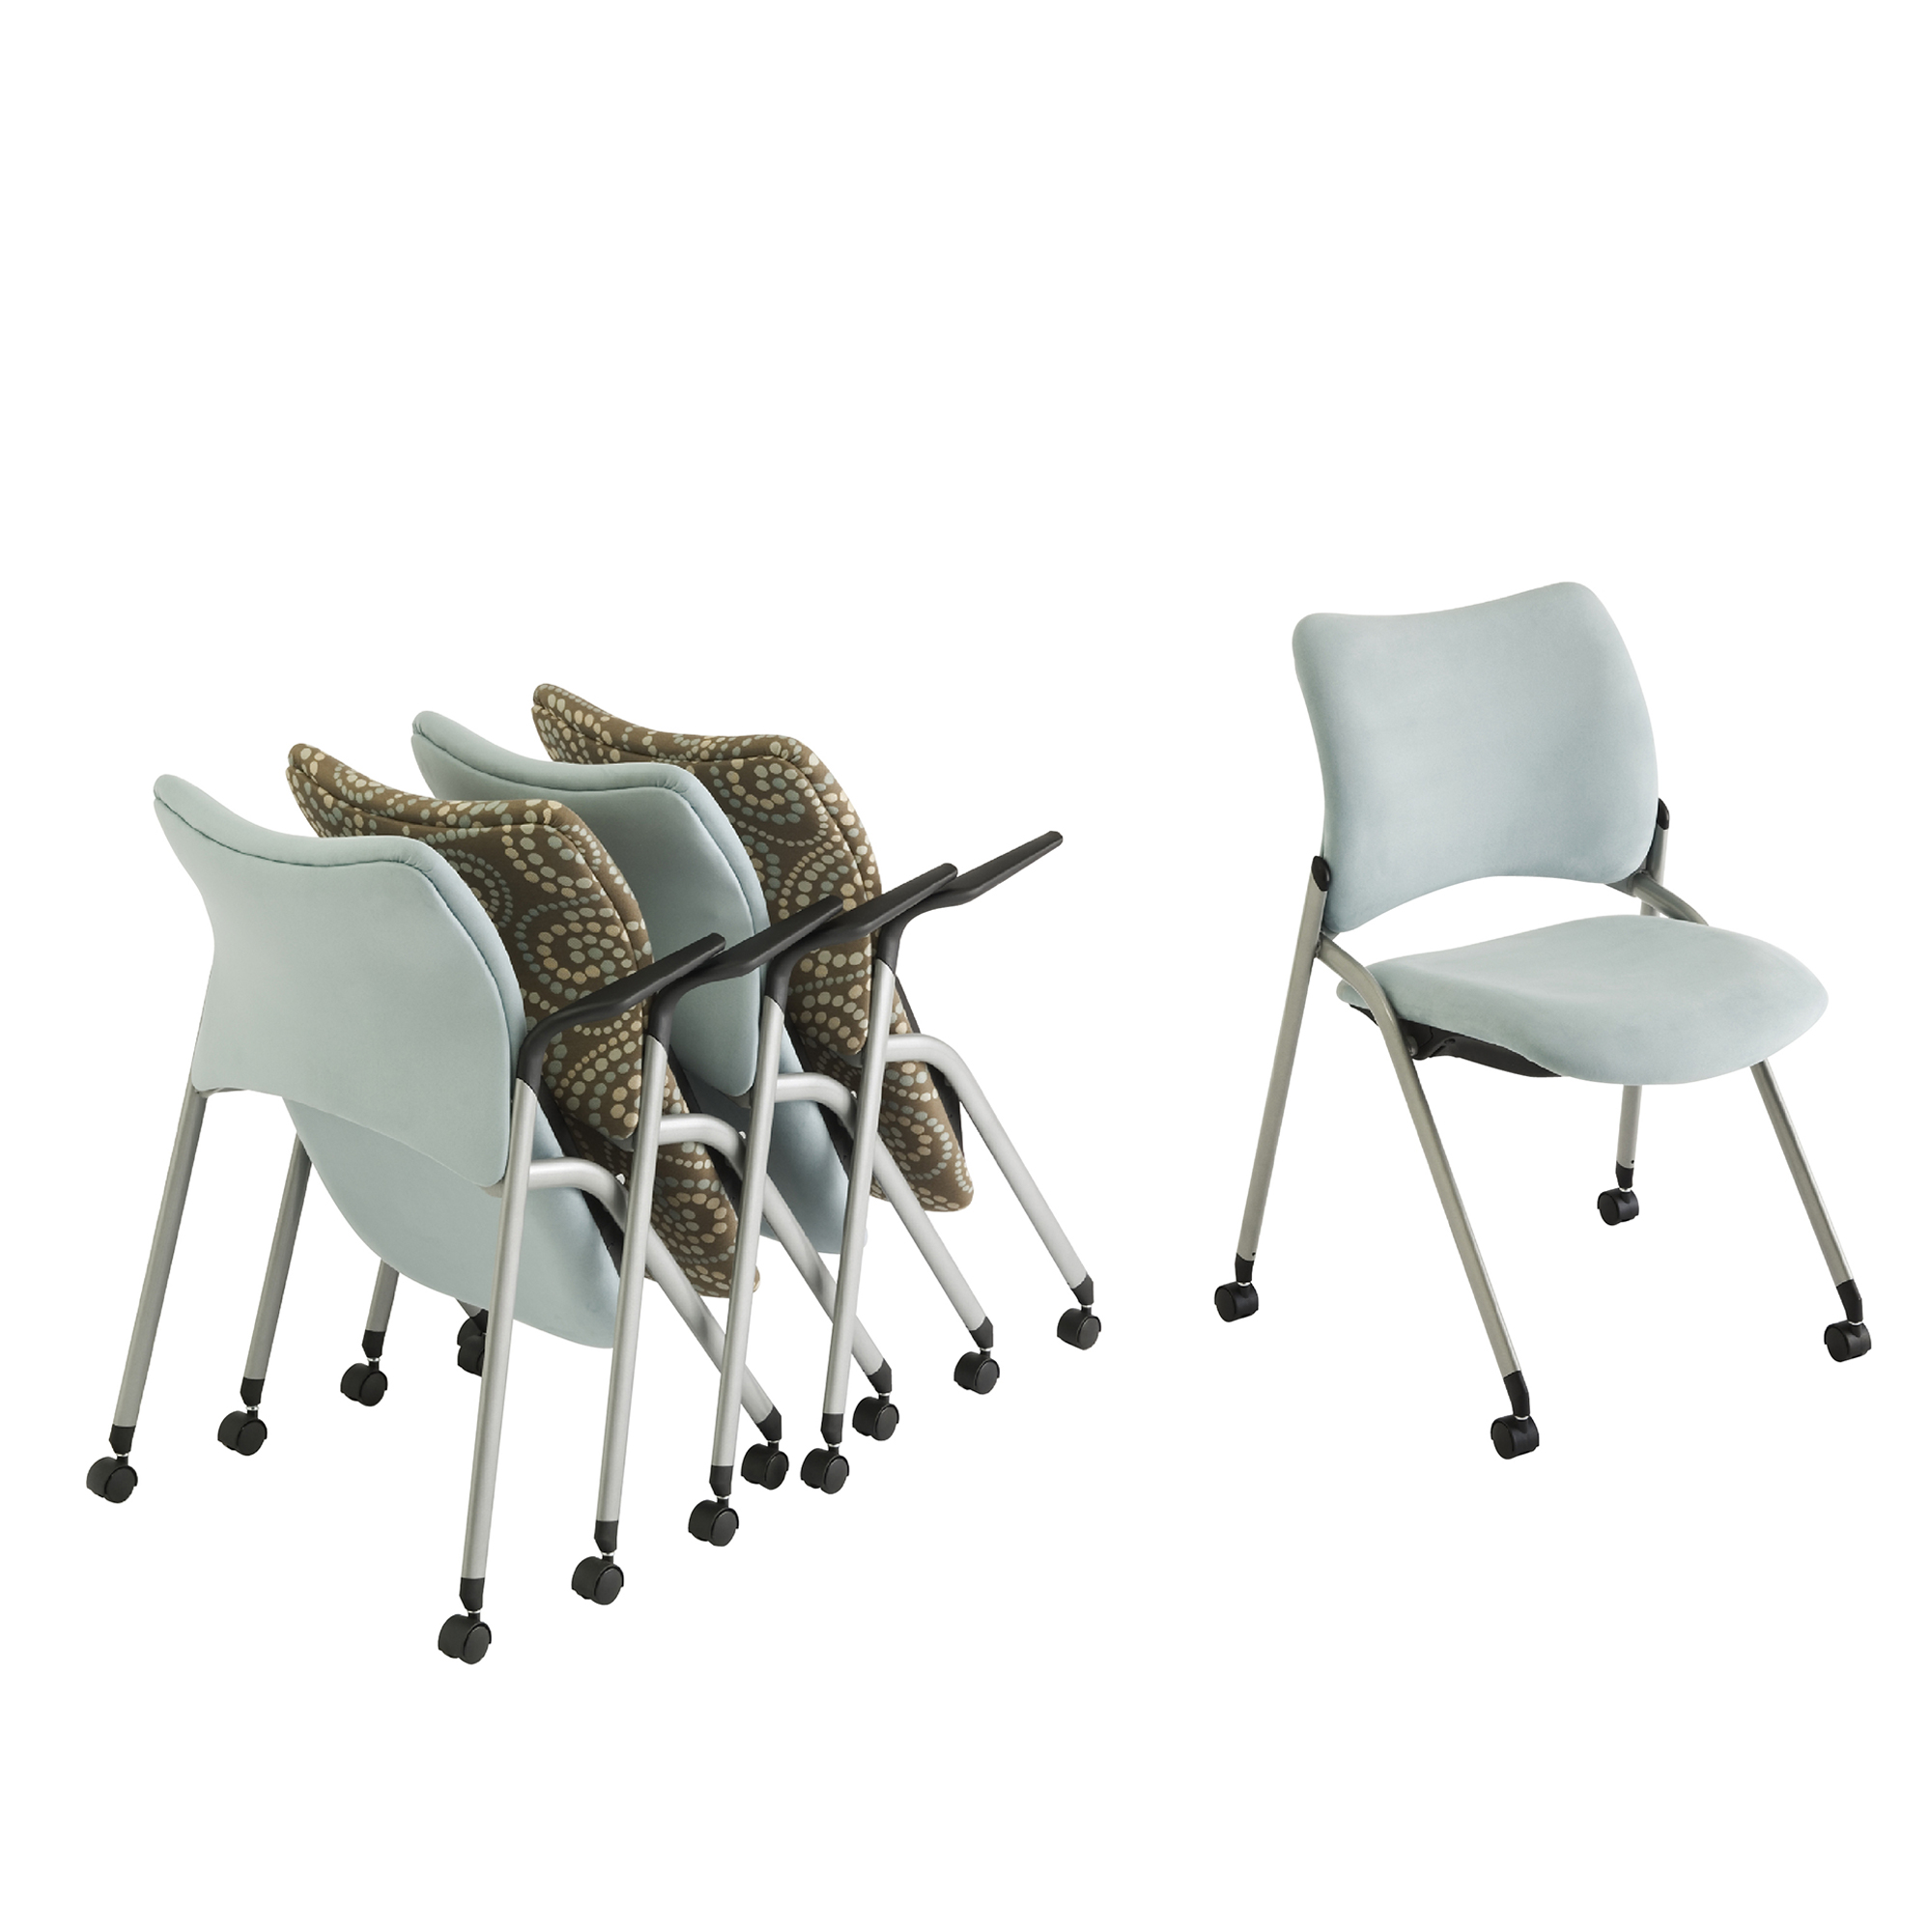 Nexxt Nesting Guest Chairs